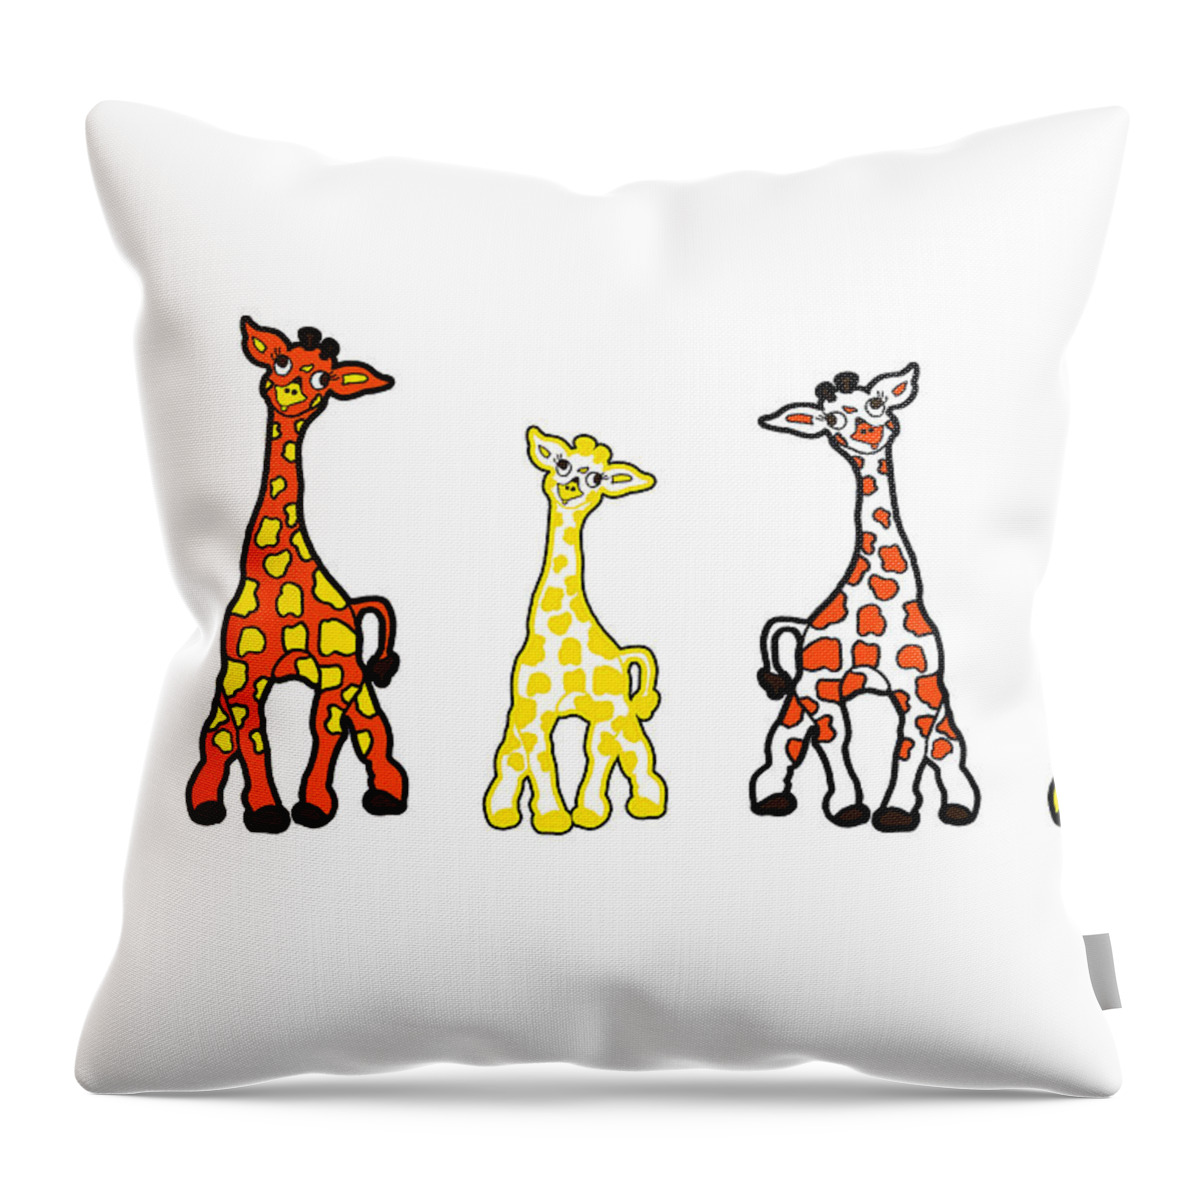 Giraffes Throw Pillow featuring the drawing Baby Giraffes In A Row #1 by Rachel Lowry